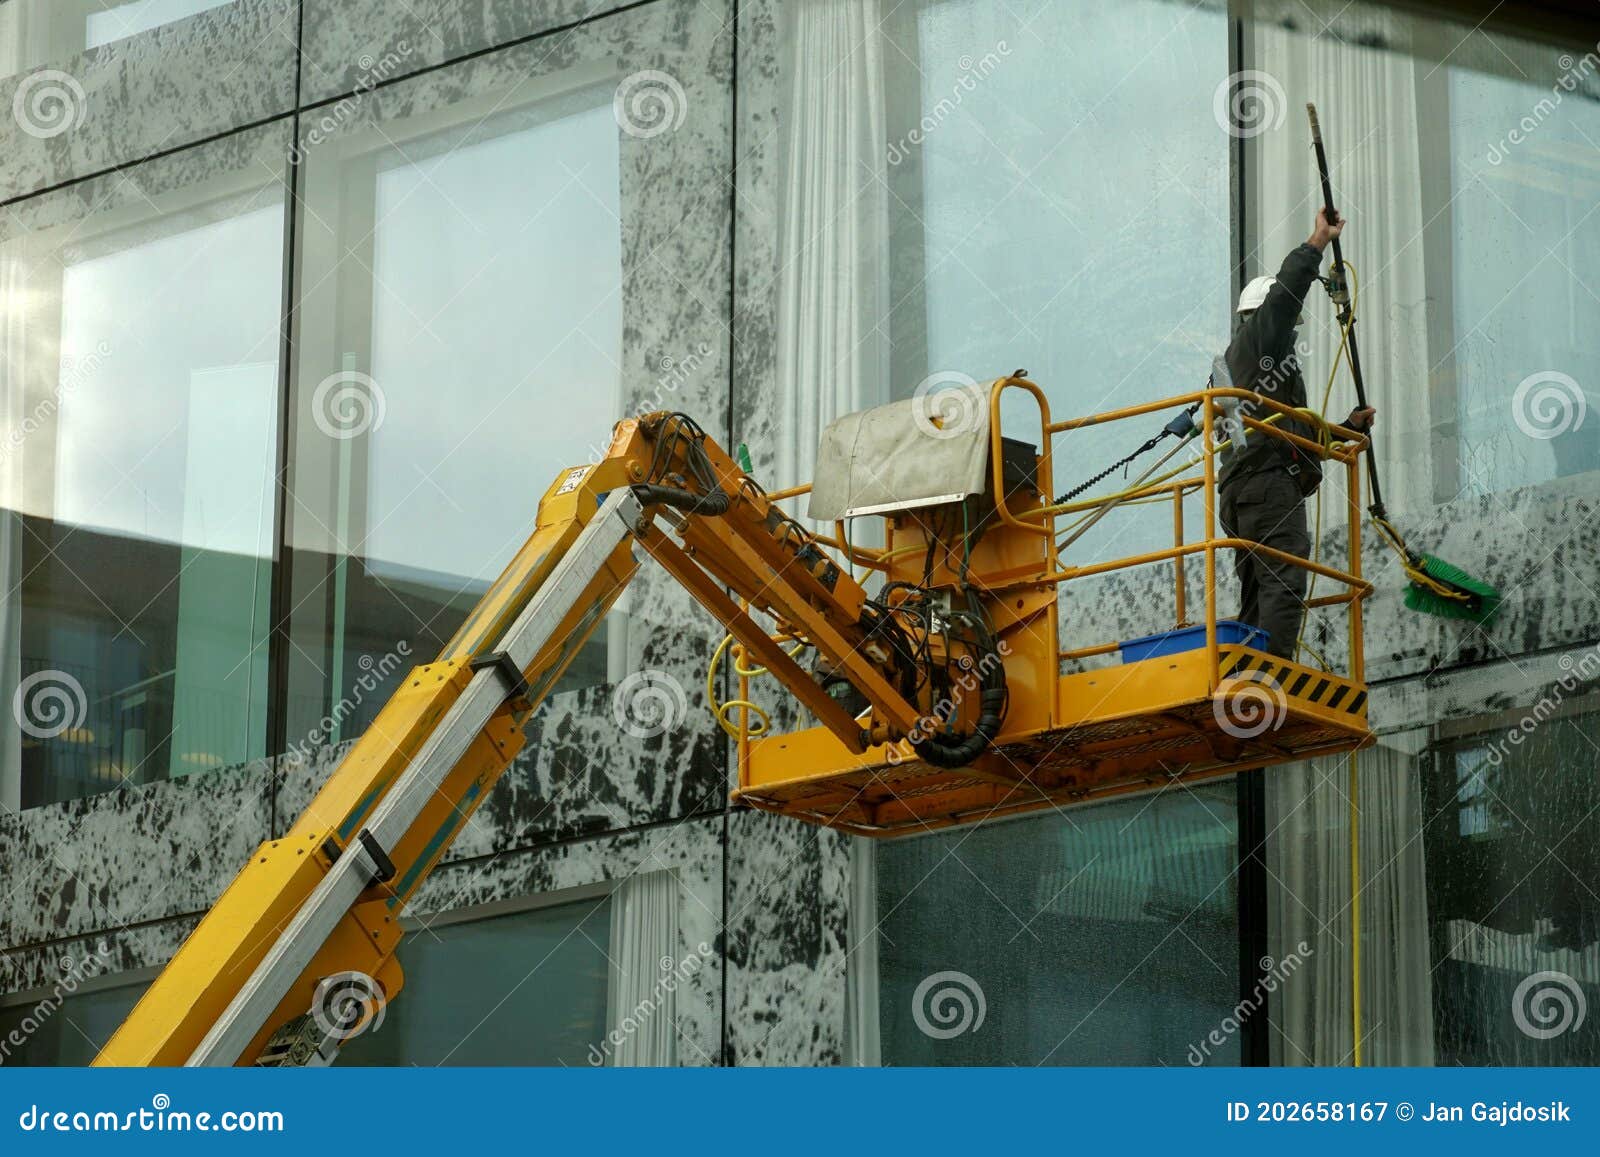 A Man Washing Large Windows and Facade of Tall Corporate Building with a Mop.  Editorial Photography - Image of machinery, industrial: 202658167